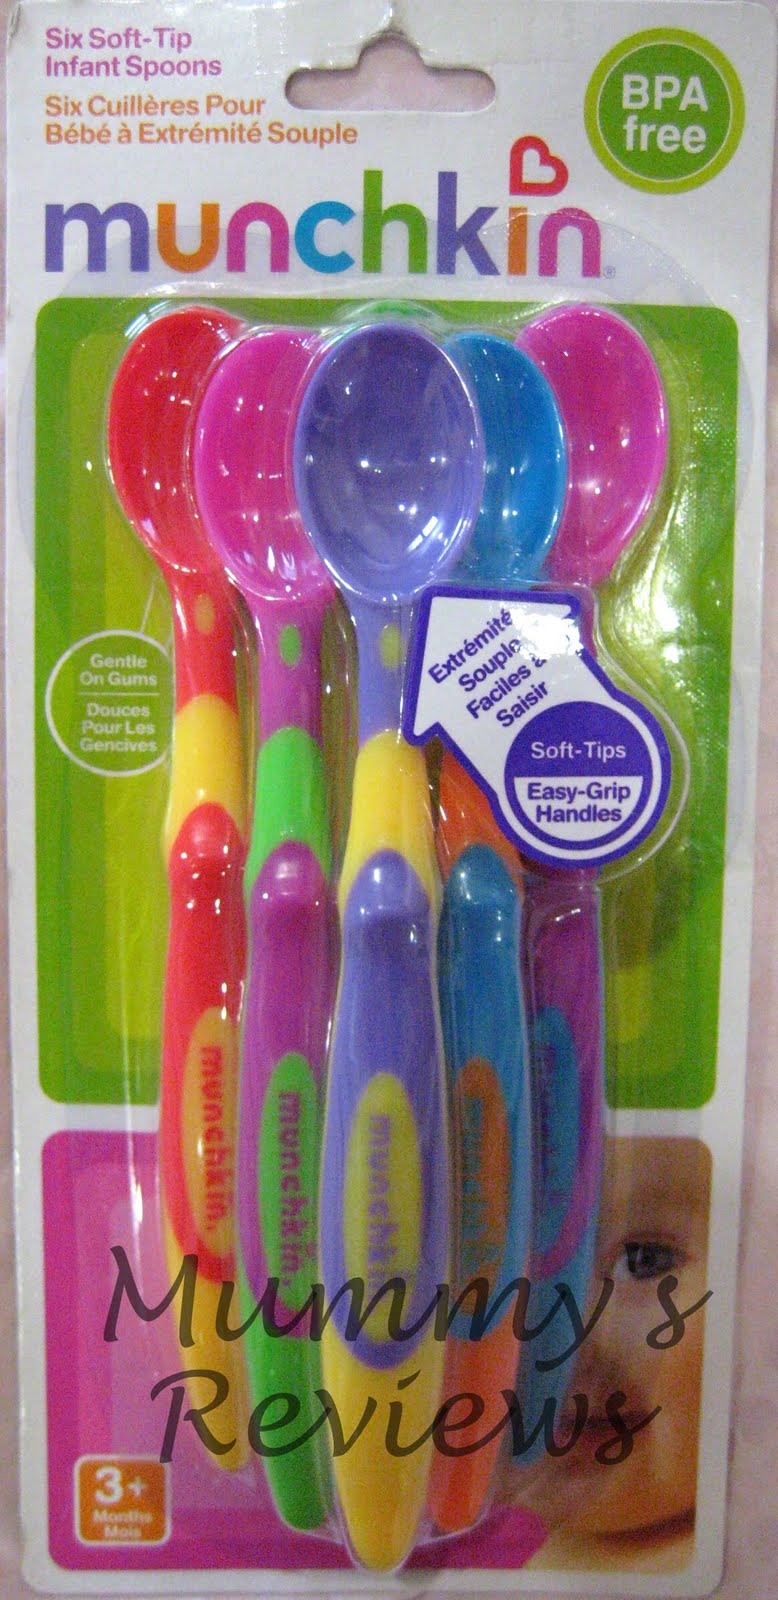 Munchkin 6-Pack Soft-Tip Infant Spoons with Multi Bowl Set – Just